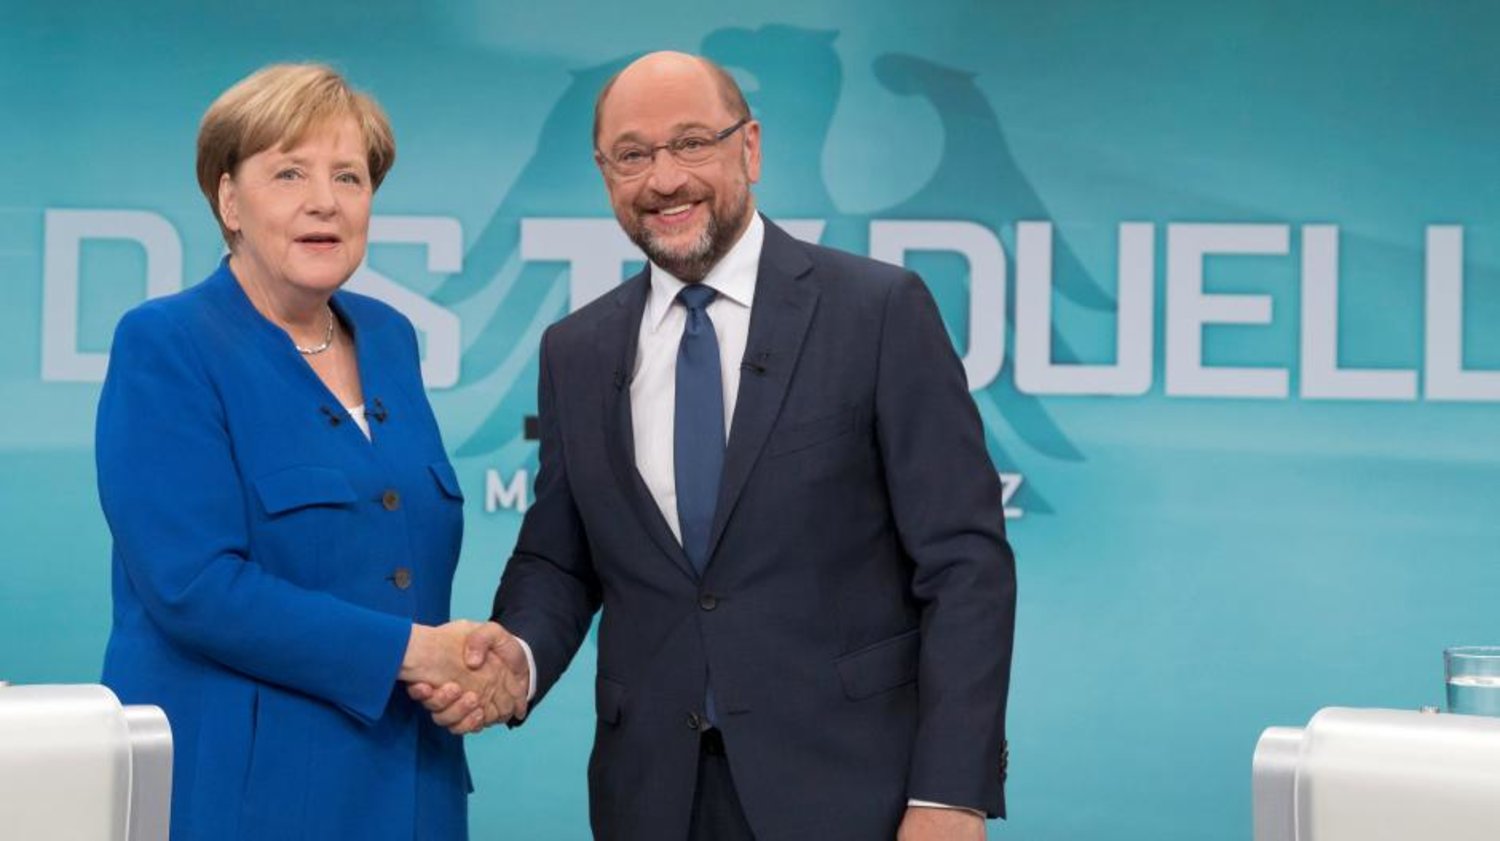 German Chancellor Angela Merkel and her challenger, Social Democratic Party SPD candidate Martin Schulz, take part in a TV debate in Berlin, Germany. (Reuters)